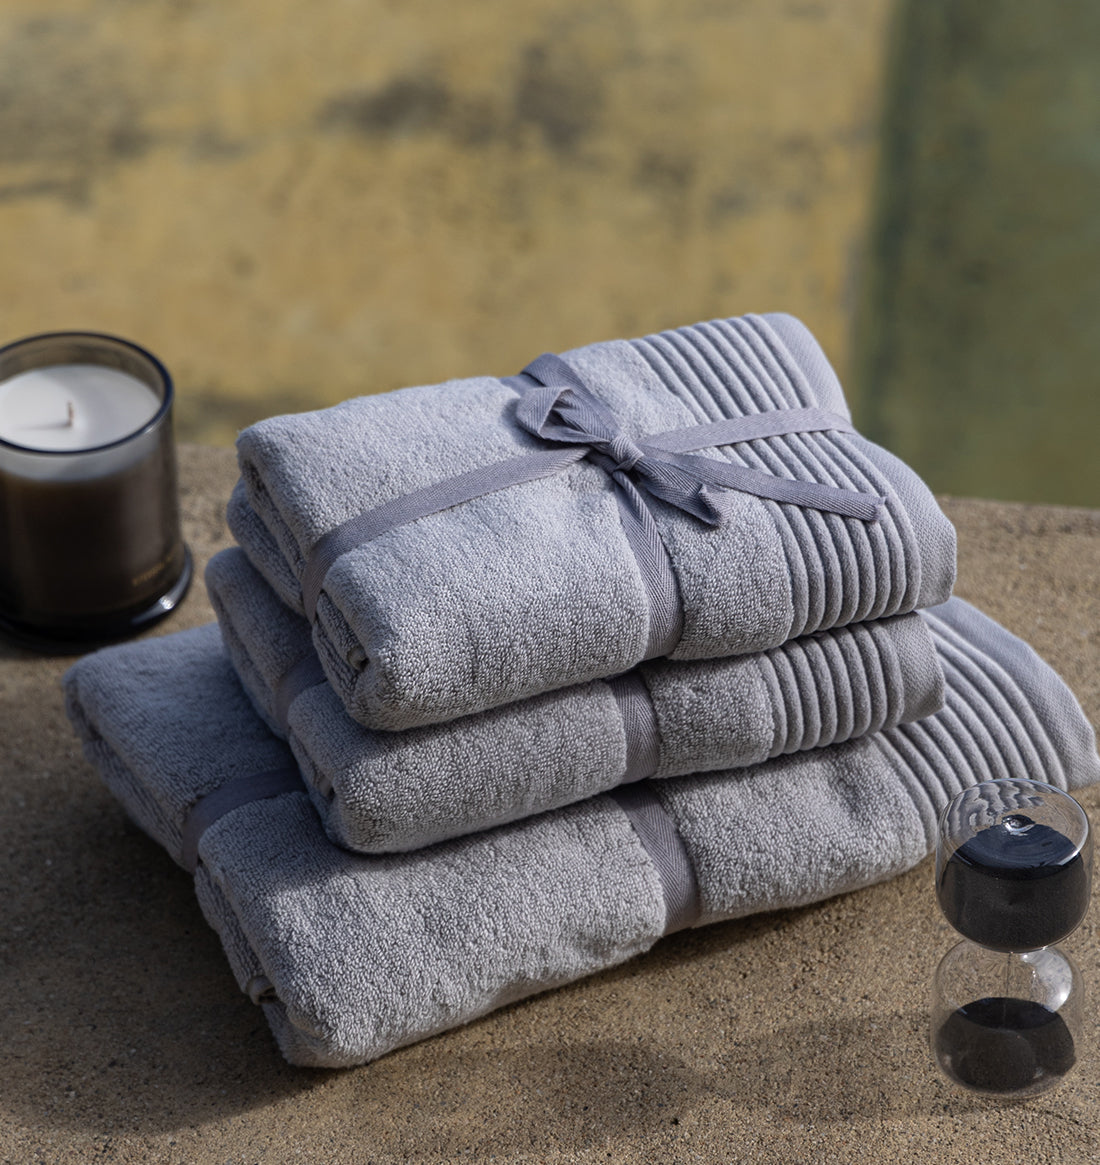 Silver Mist Fluffy Bath Towel - A luxurious and plush bath towel in a serene silver mist color. Designed for ultimate comfort and absorbency, perfect for indulging in post-shower relaxation. Crafted from premium materials to provide a soft and gentle feel against the skin. 